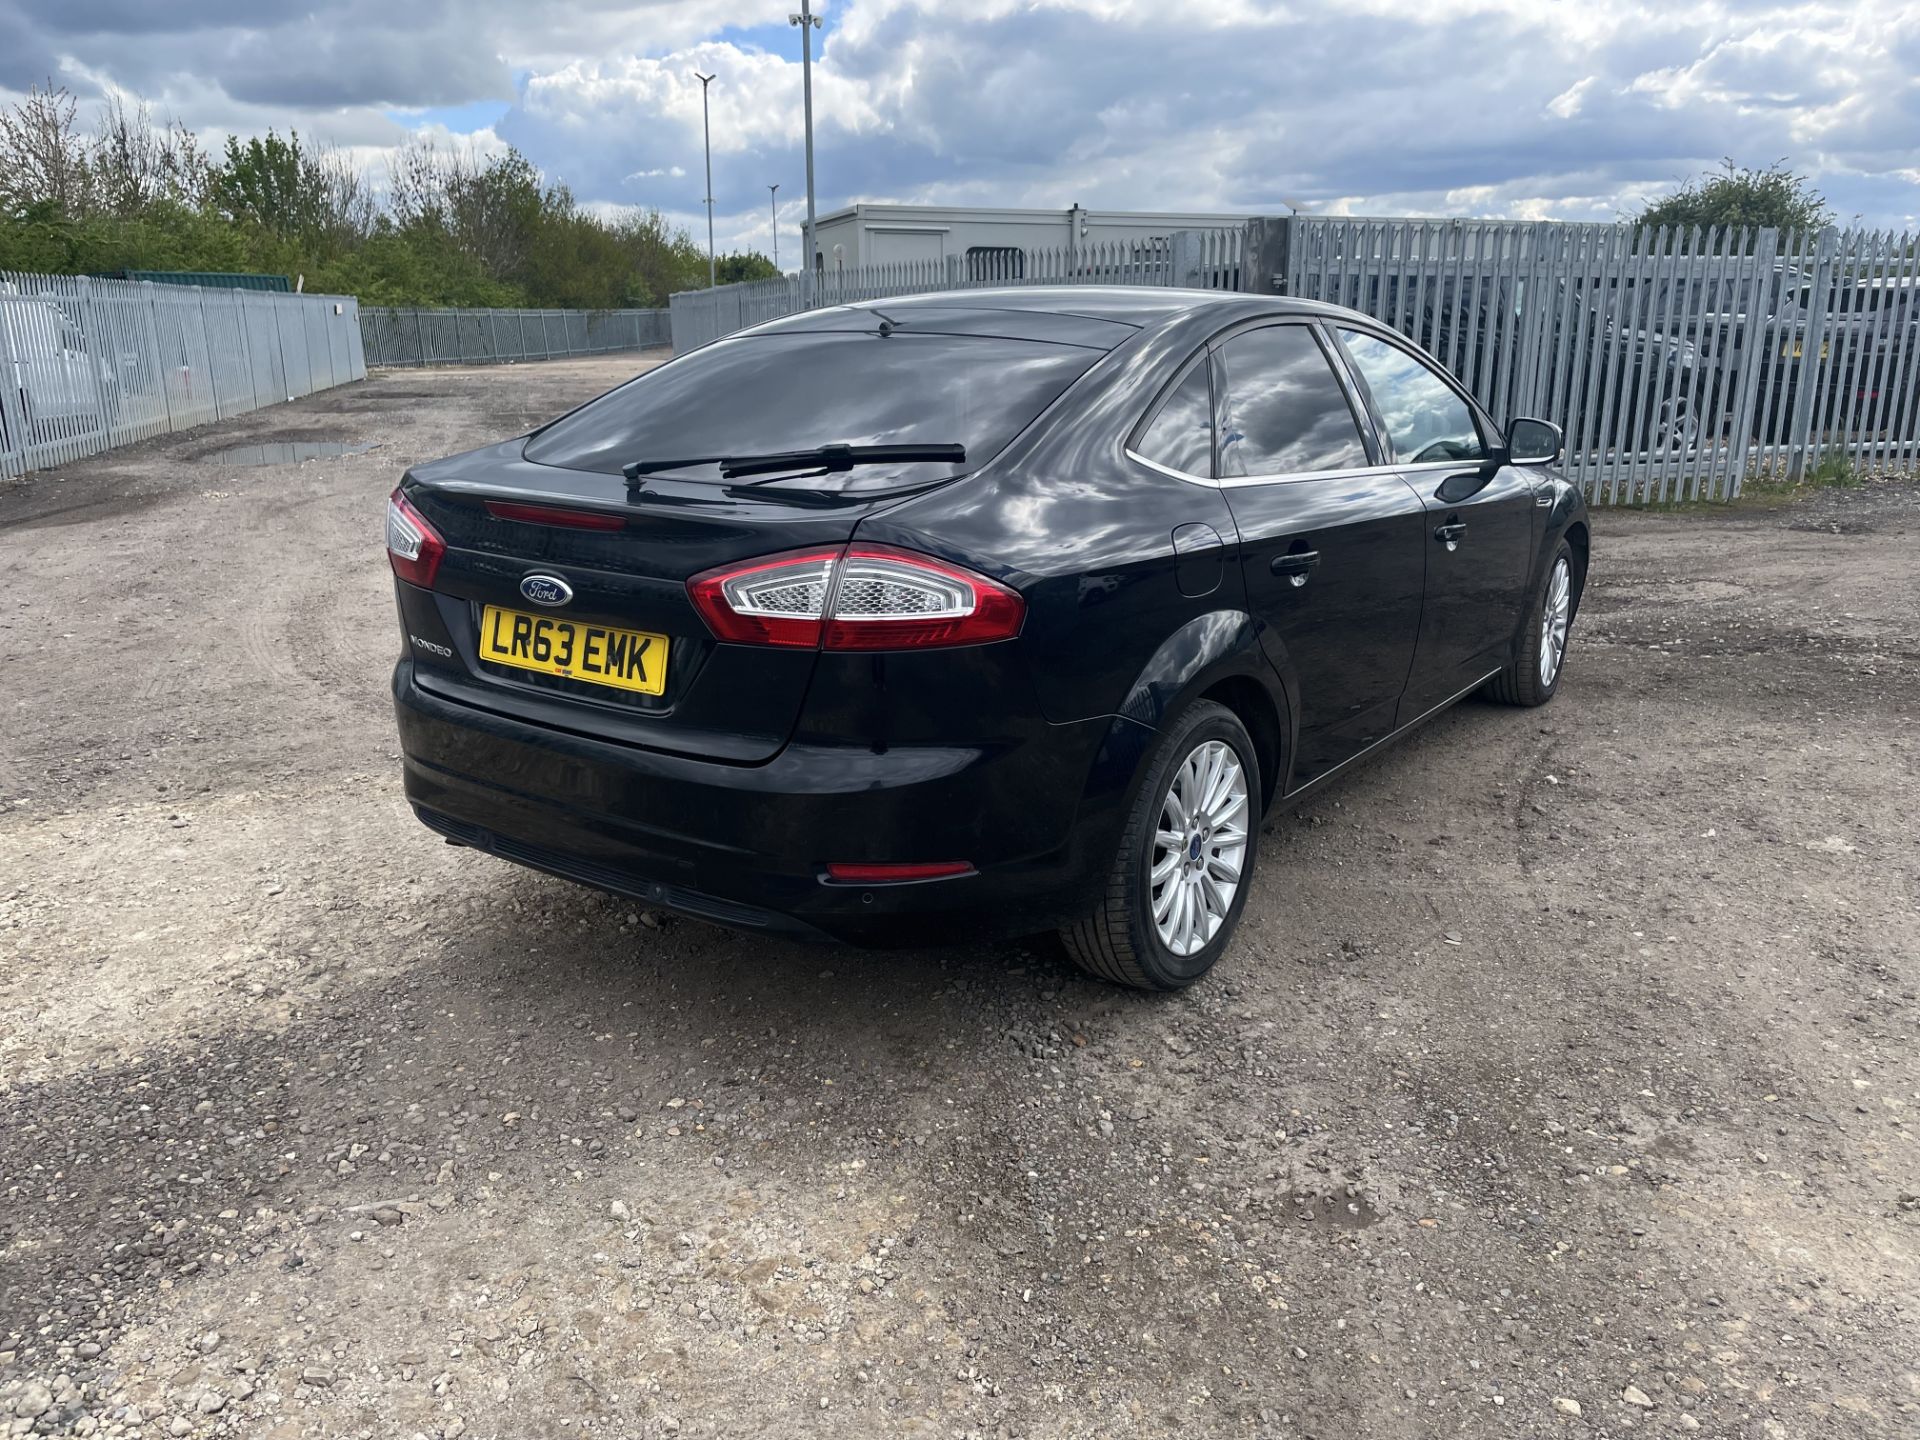 ** ON SALE ** Ford Mondeo TDCI 140 Business Edition Zetec 2.0 2013'63 Reg'-Automatic-Alloy Wheels - Image 9 of 32